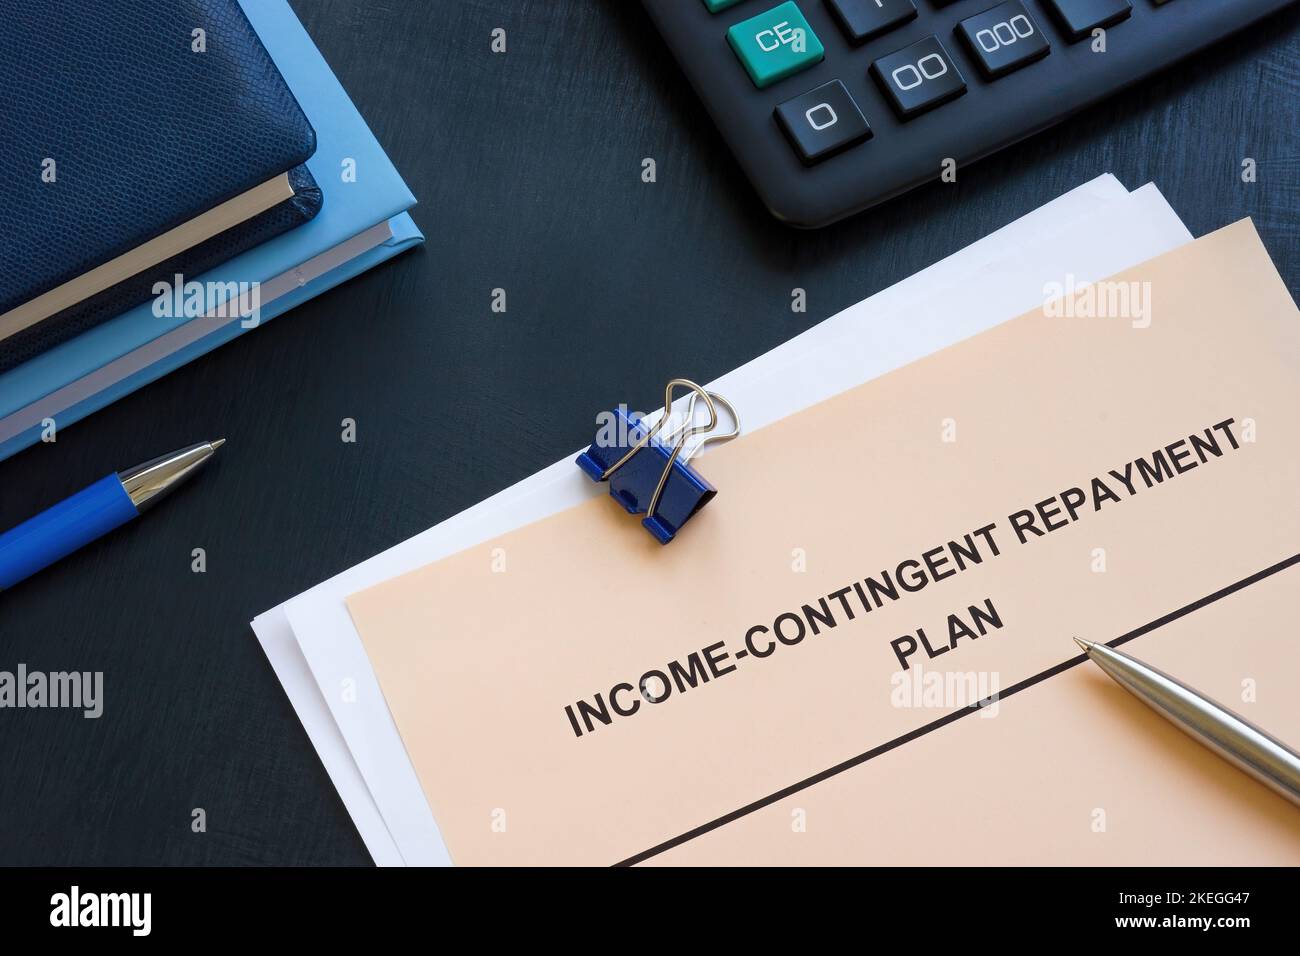 Income contingent repayment plan near calculator and notepads. Stock Photo